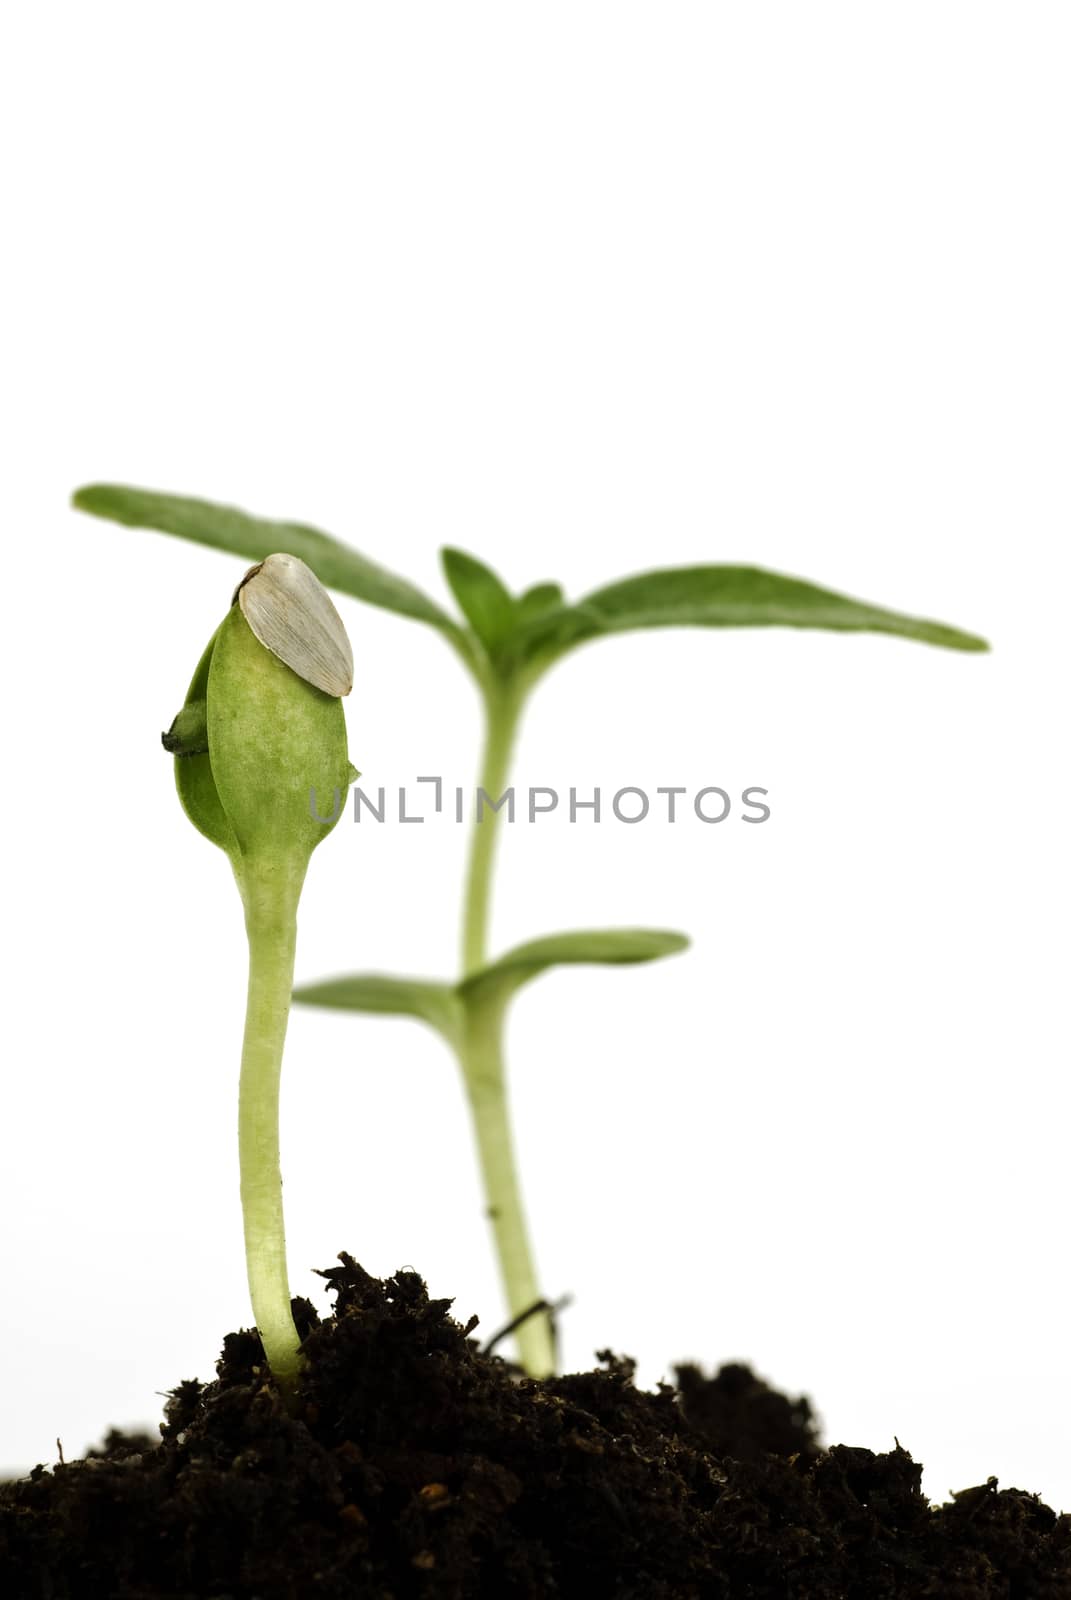 Vertical image of a small vegetable plant growing and isolated on a white background.  Macro shot